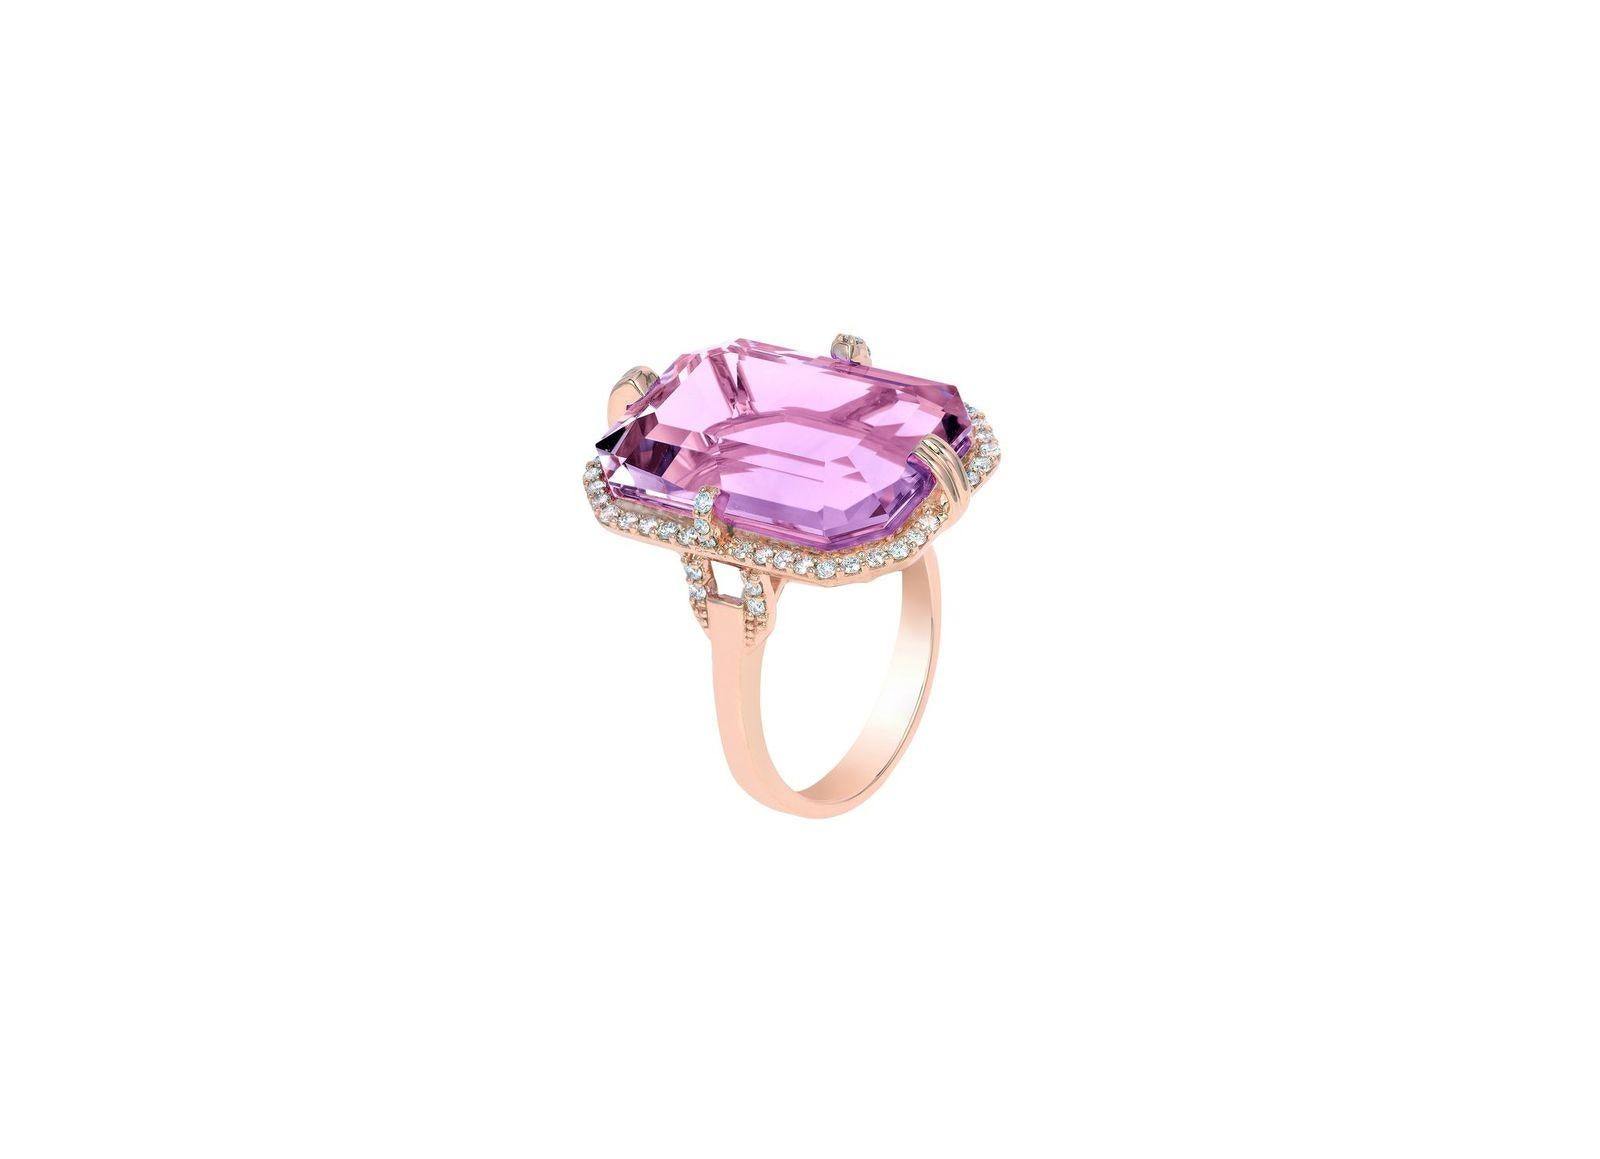 Lavender Amethyst Emerald Cut Ring with Diamonds in 18k Yellow Gold, from 'Gossip' Collection
Please allow 3-4 weeks for this item to be delivered.

Stone Size: 10x15 mm 

Gemstone Approx Wt: Lavender Amethyst- 6.89 Carats

Diamonds: G-H / VS,